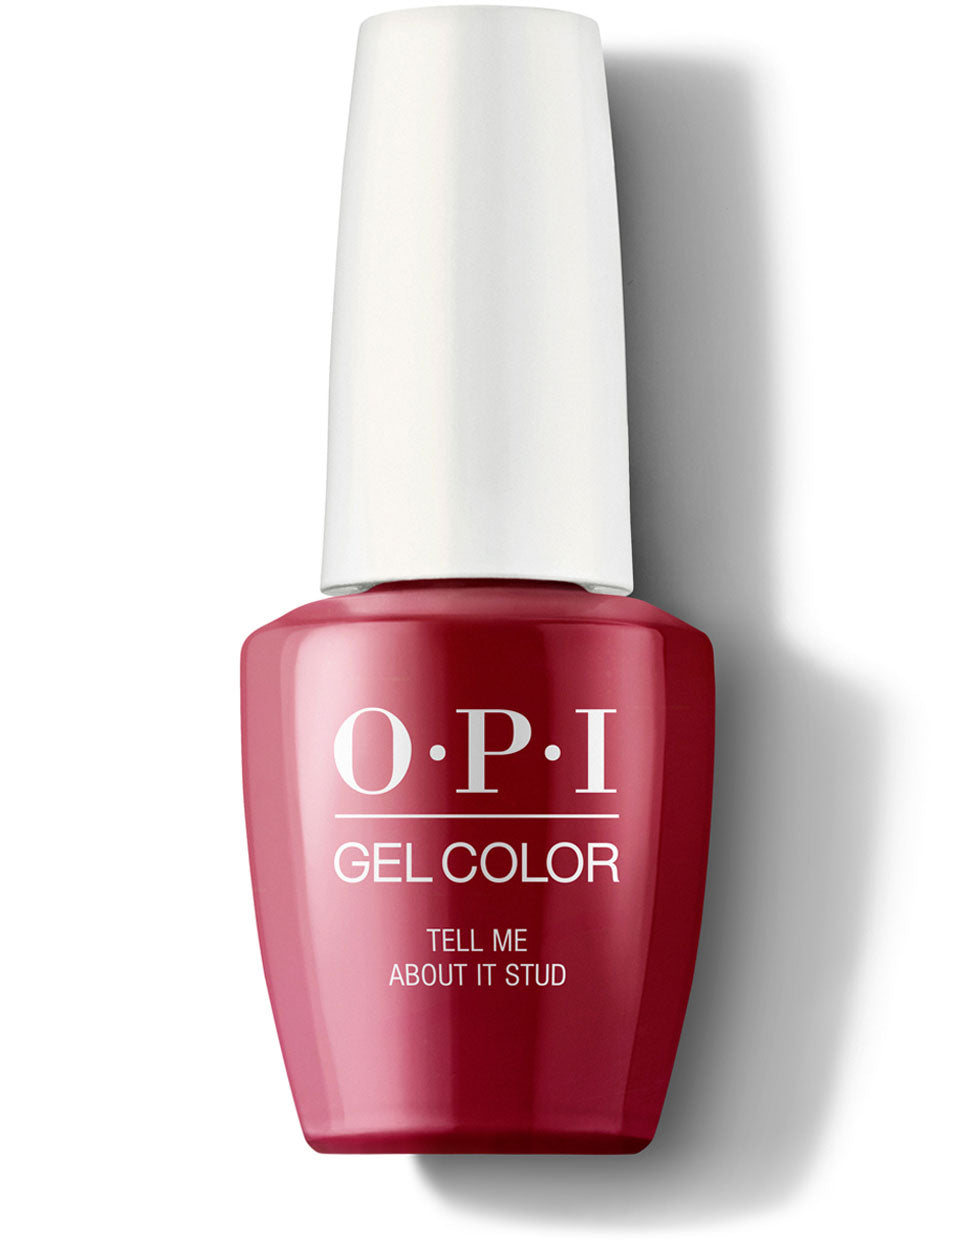 OPI GC G51B - GEL COLOR TELL ME ABOUT IT STUD (MINI)